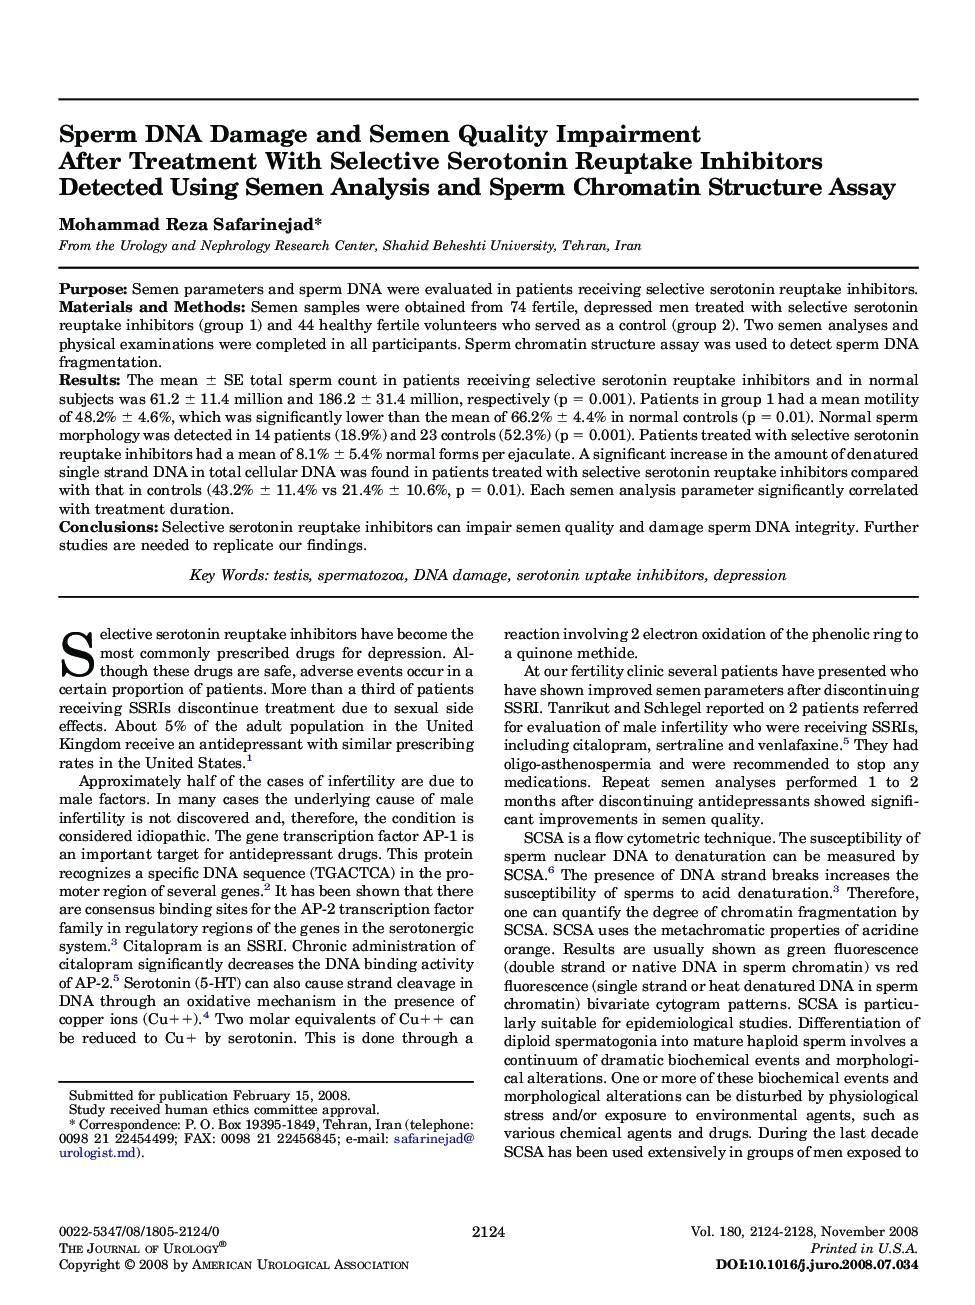 Sperm DNA Damage and Semen Quality Impairment After Treatment With Selective Serotonin Reuptake Inhibitors Detected Using Semen Analysis and Sperm Chromatin Structure Assay 